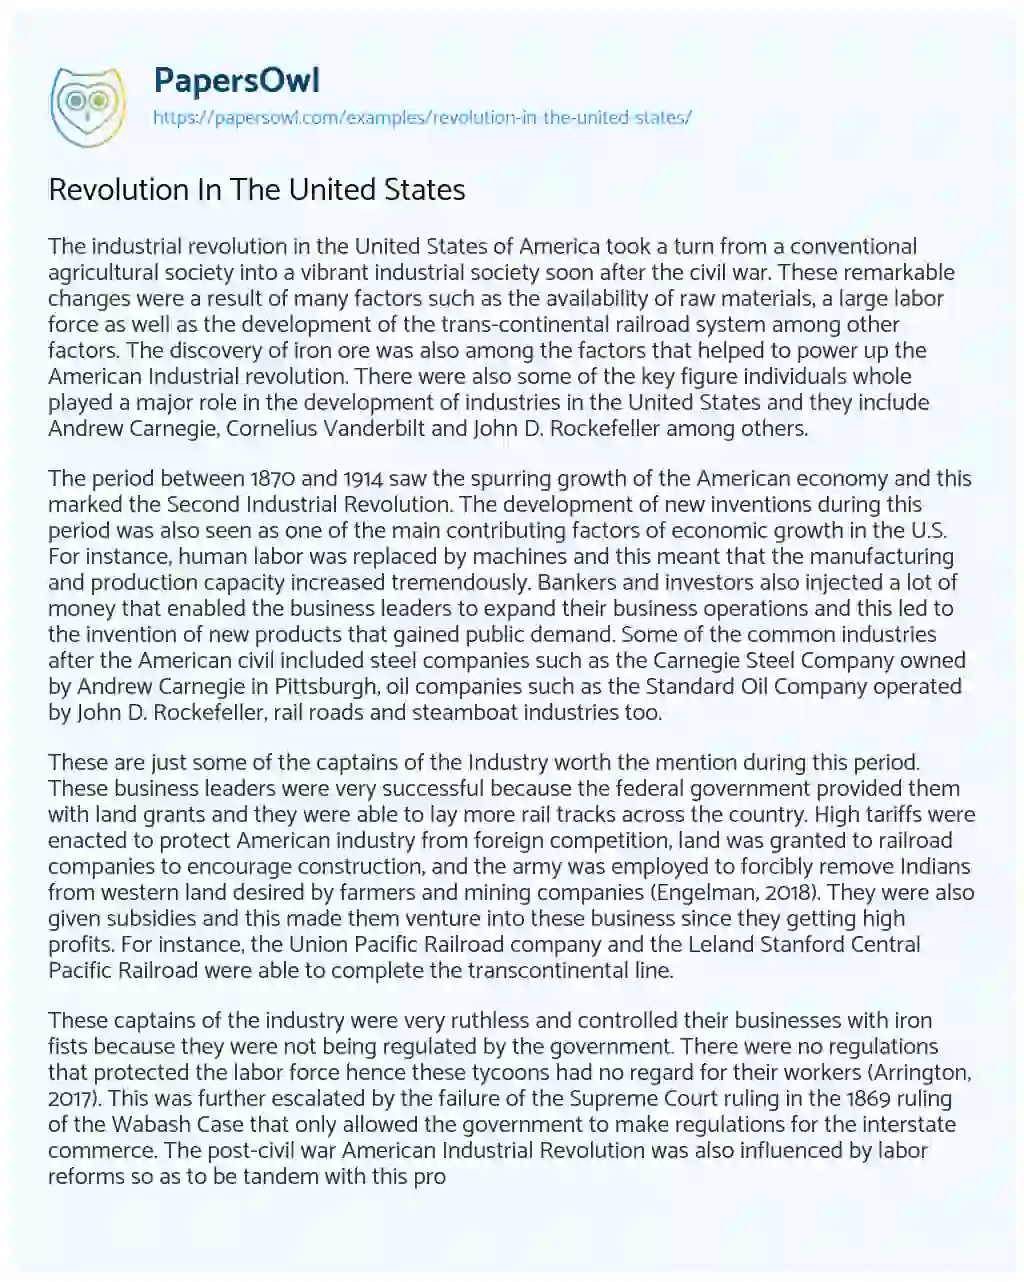 Essay on Revolution in the United States